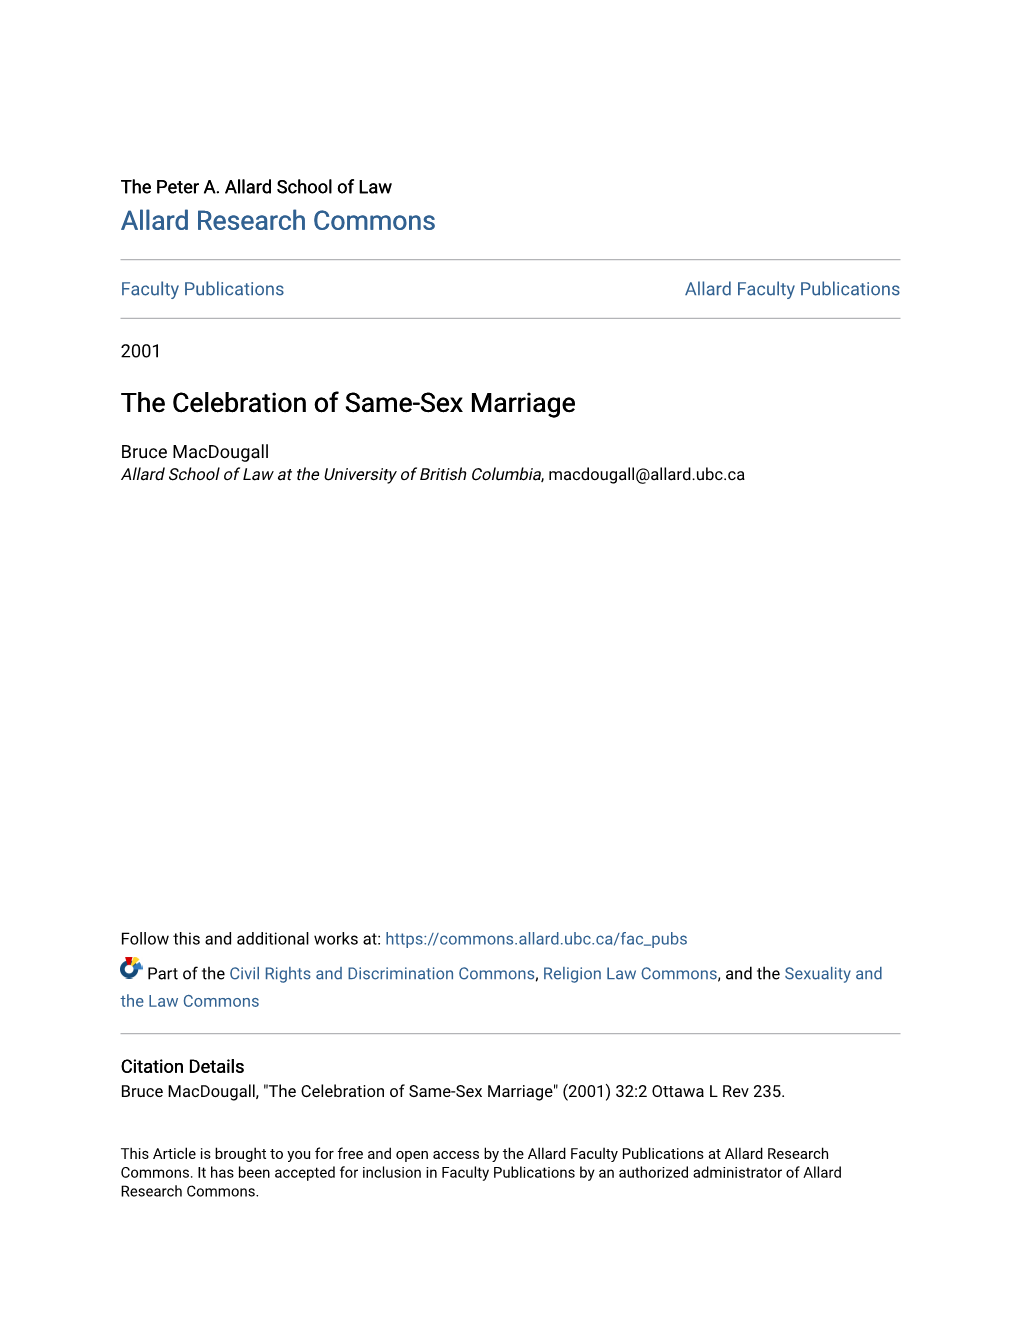 The Celebration of Same-Sex Marriage